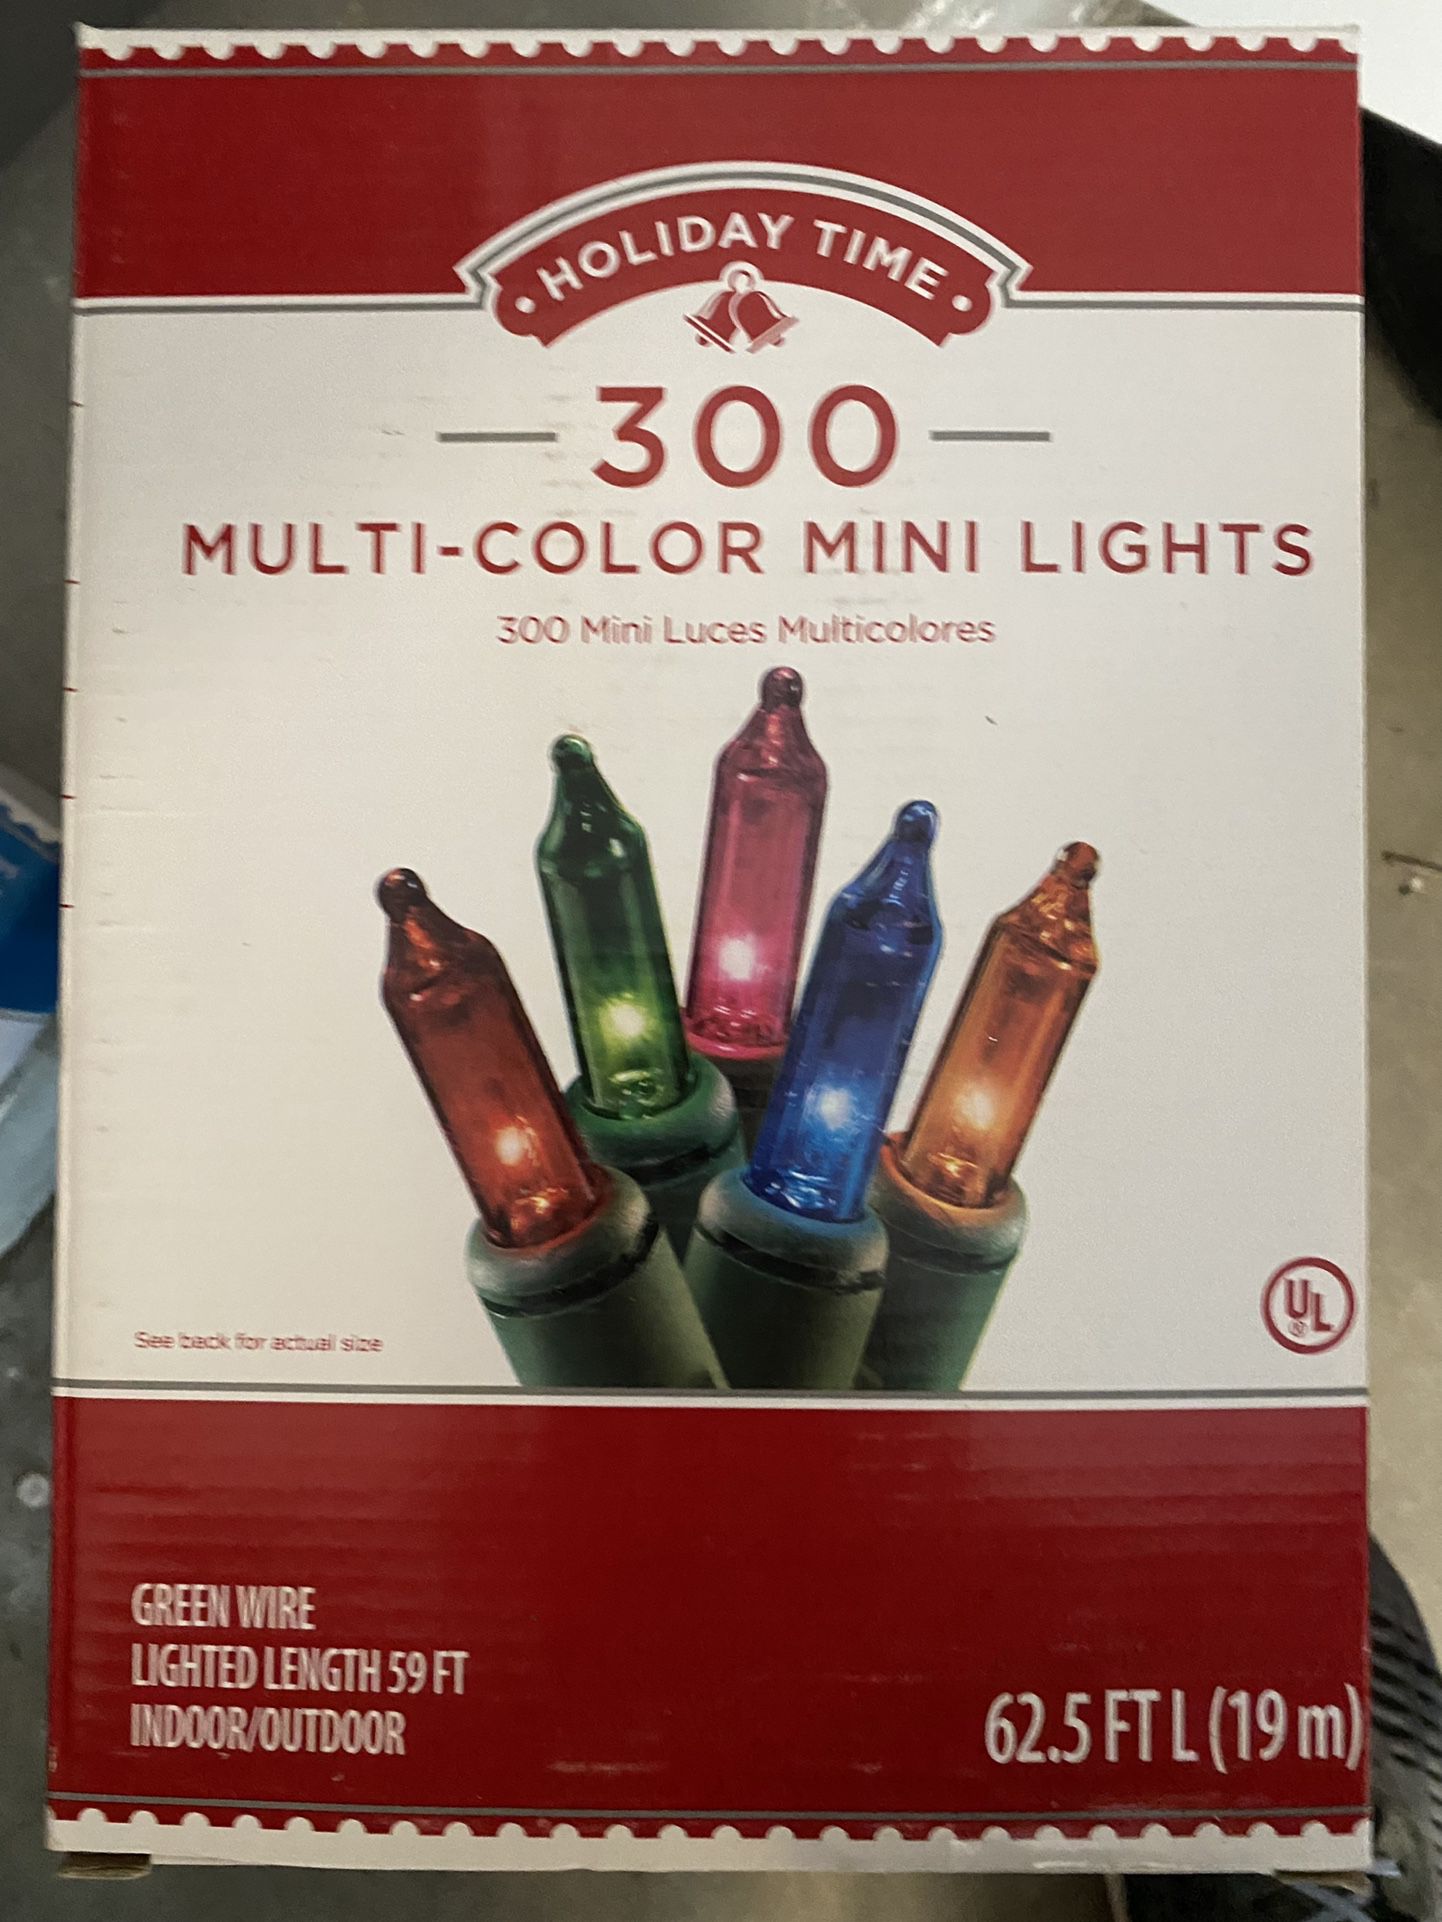 Holiday Time 300 Multi-color Mini Lights Green Wire Indoor/Outdoor NIB